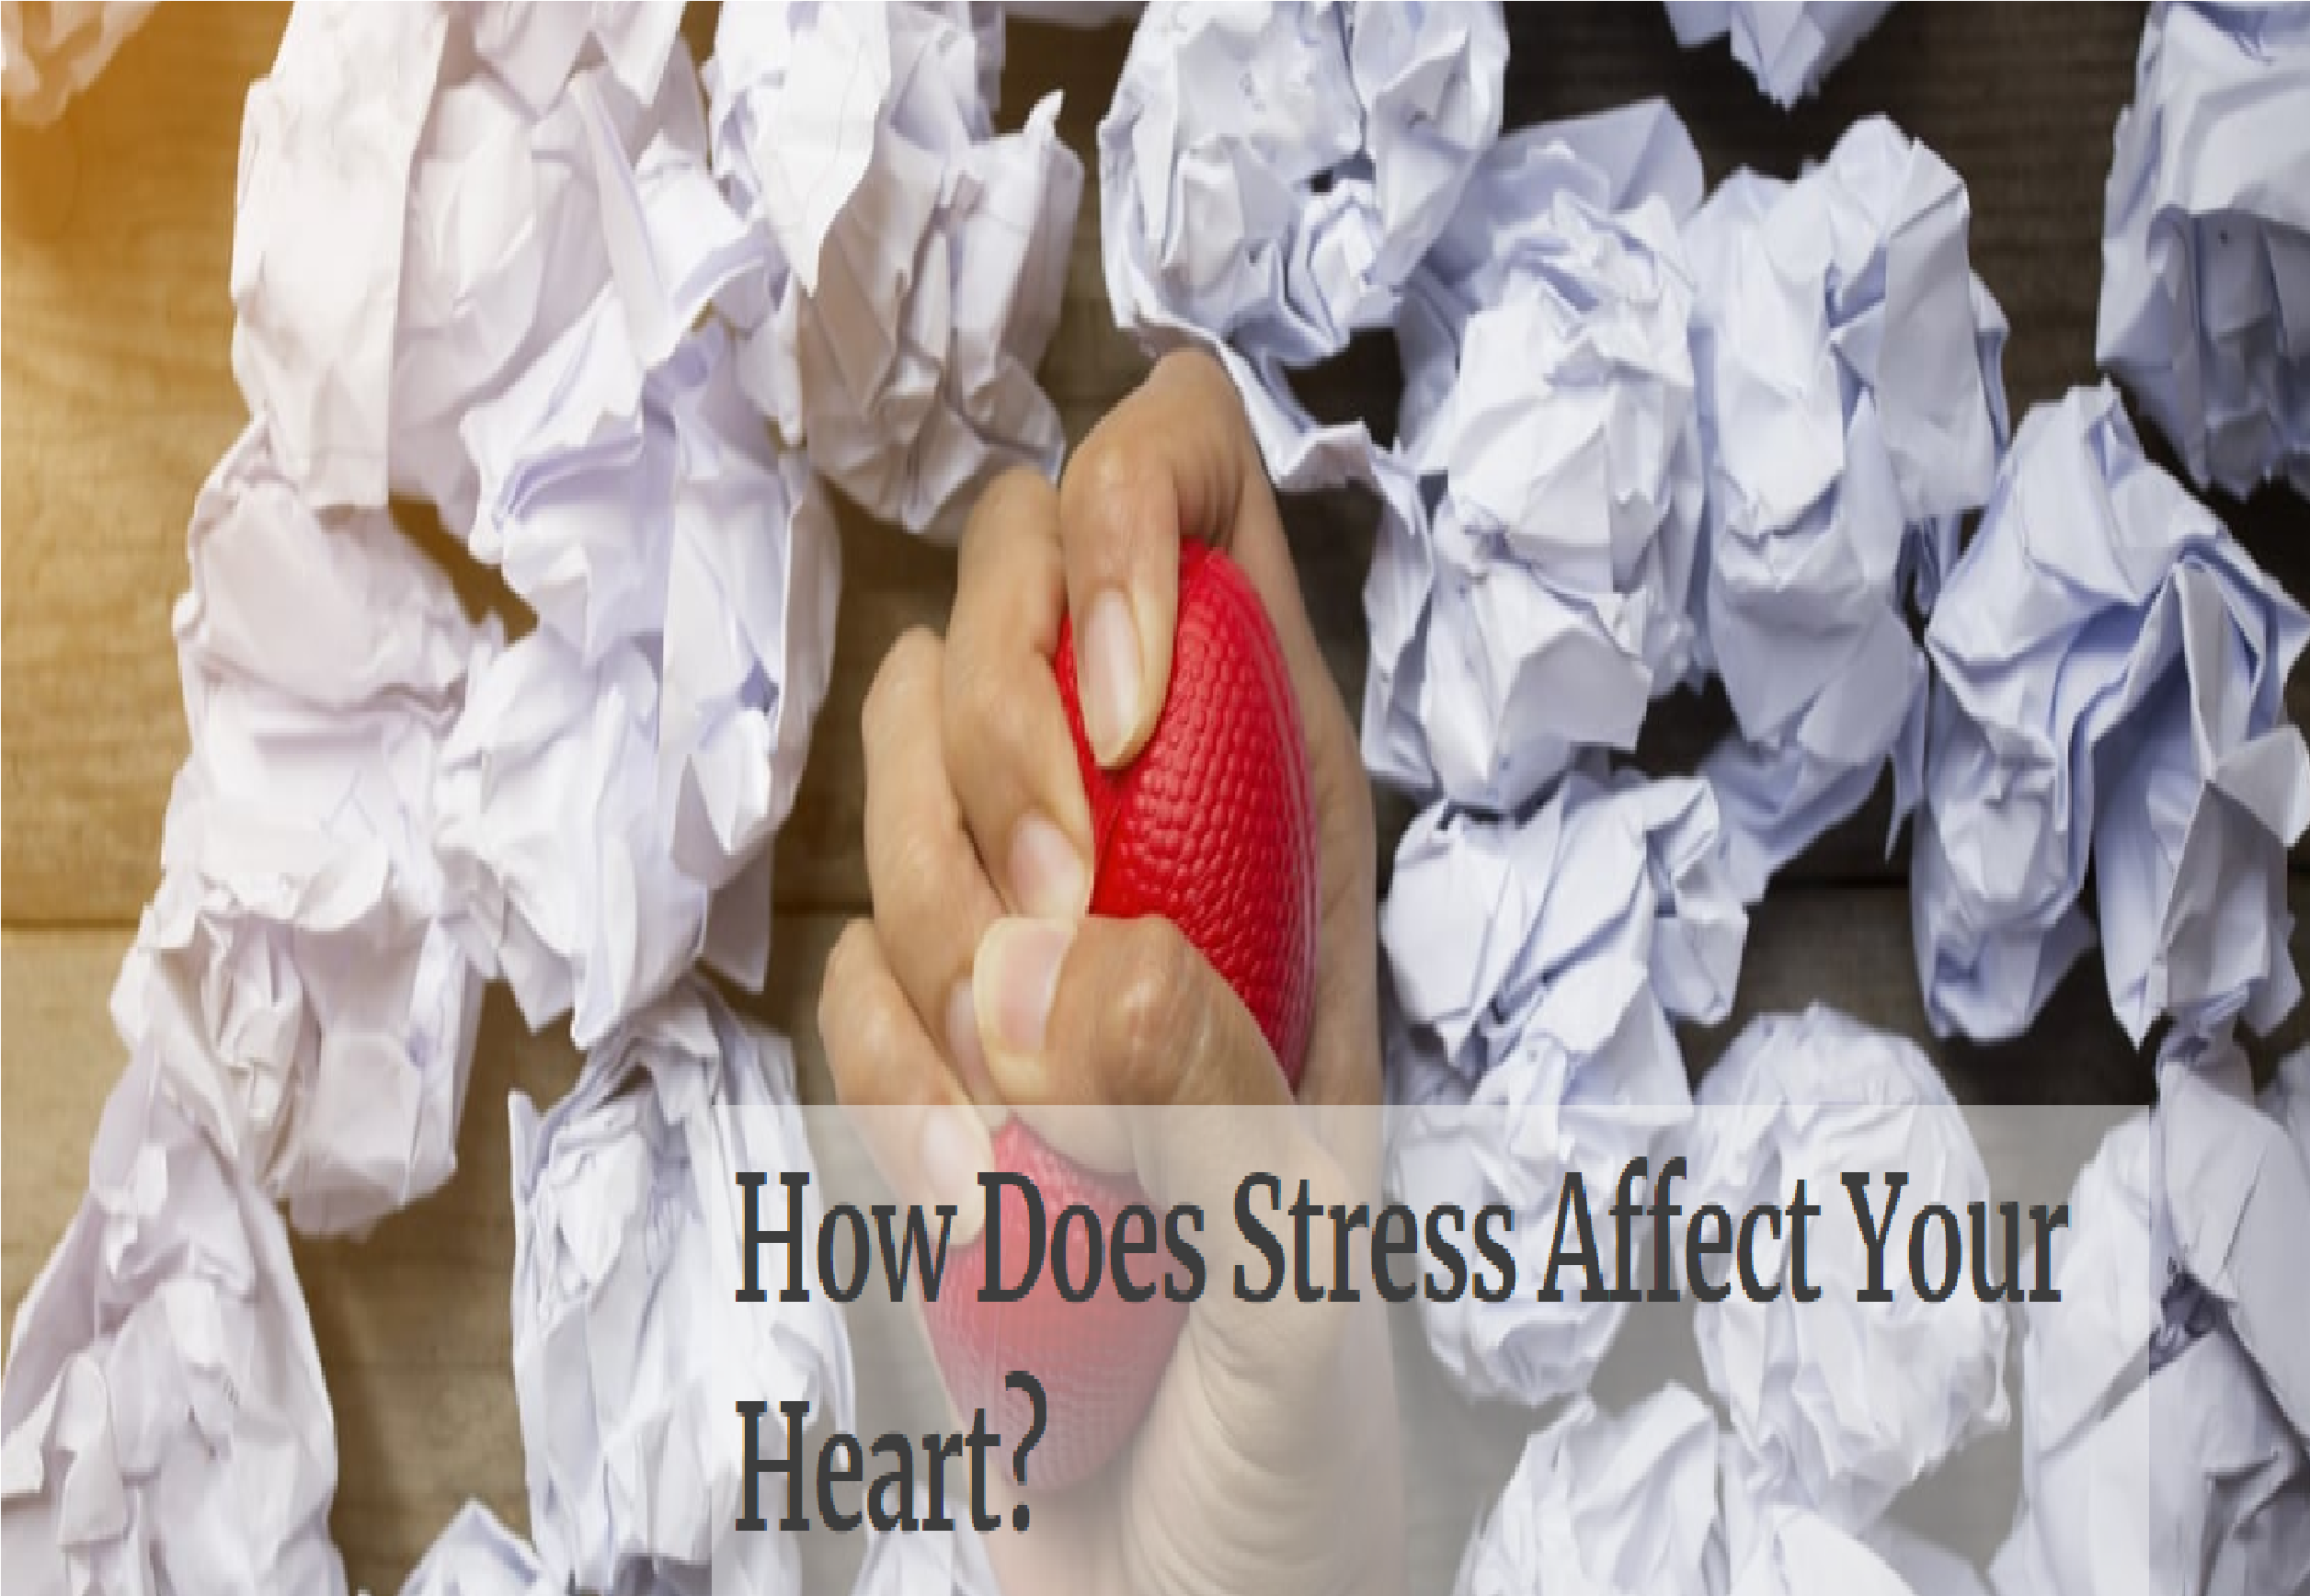 How Does Stress Affect Your Heart?